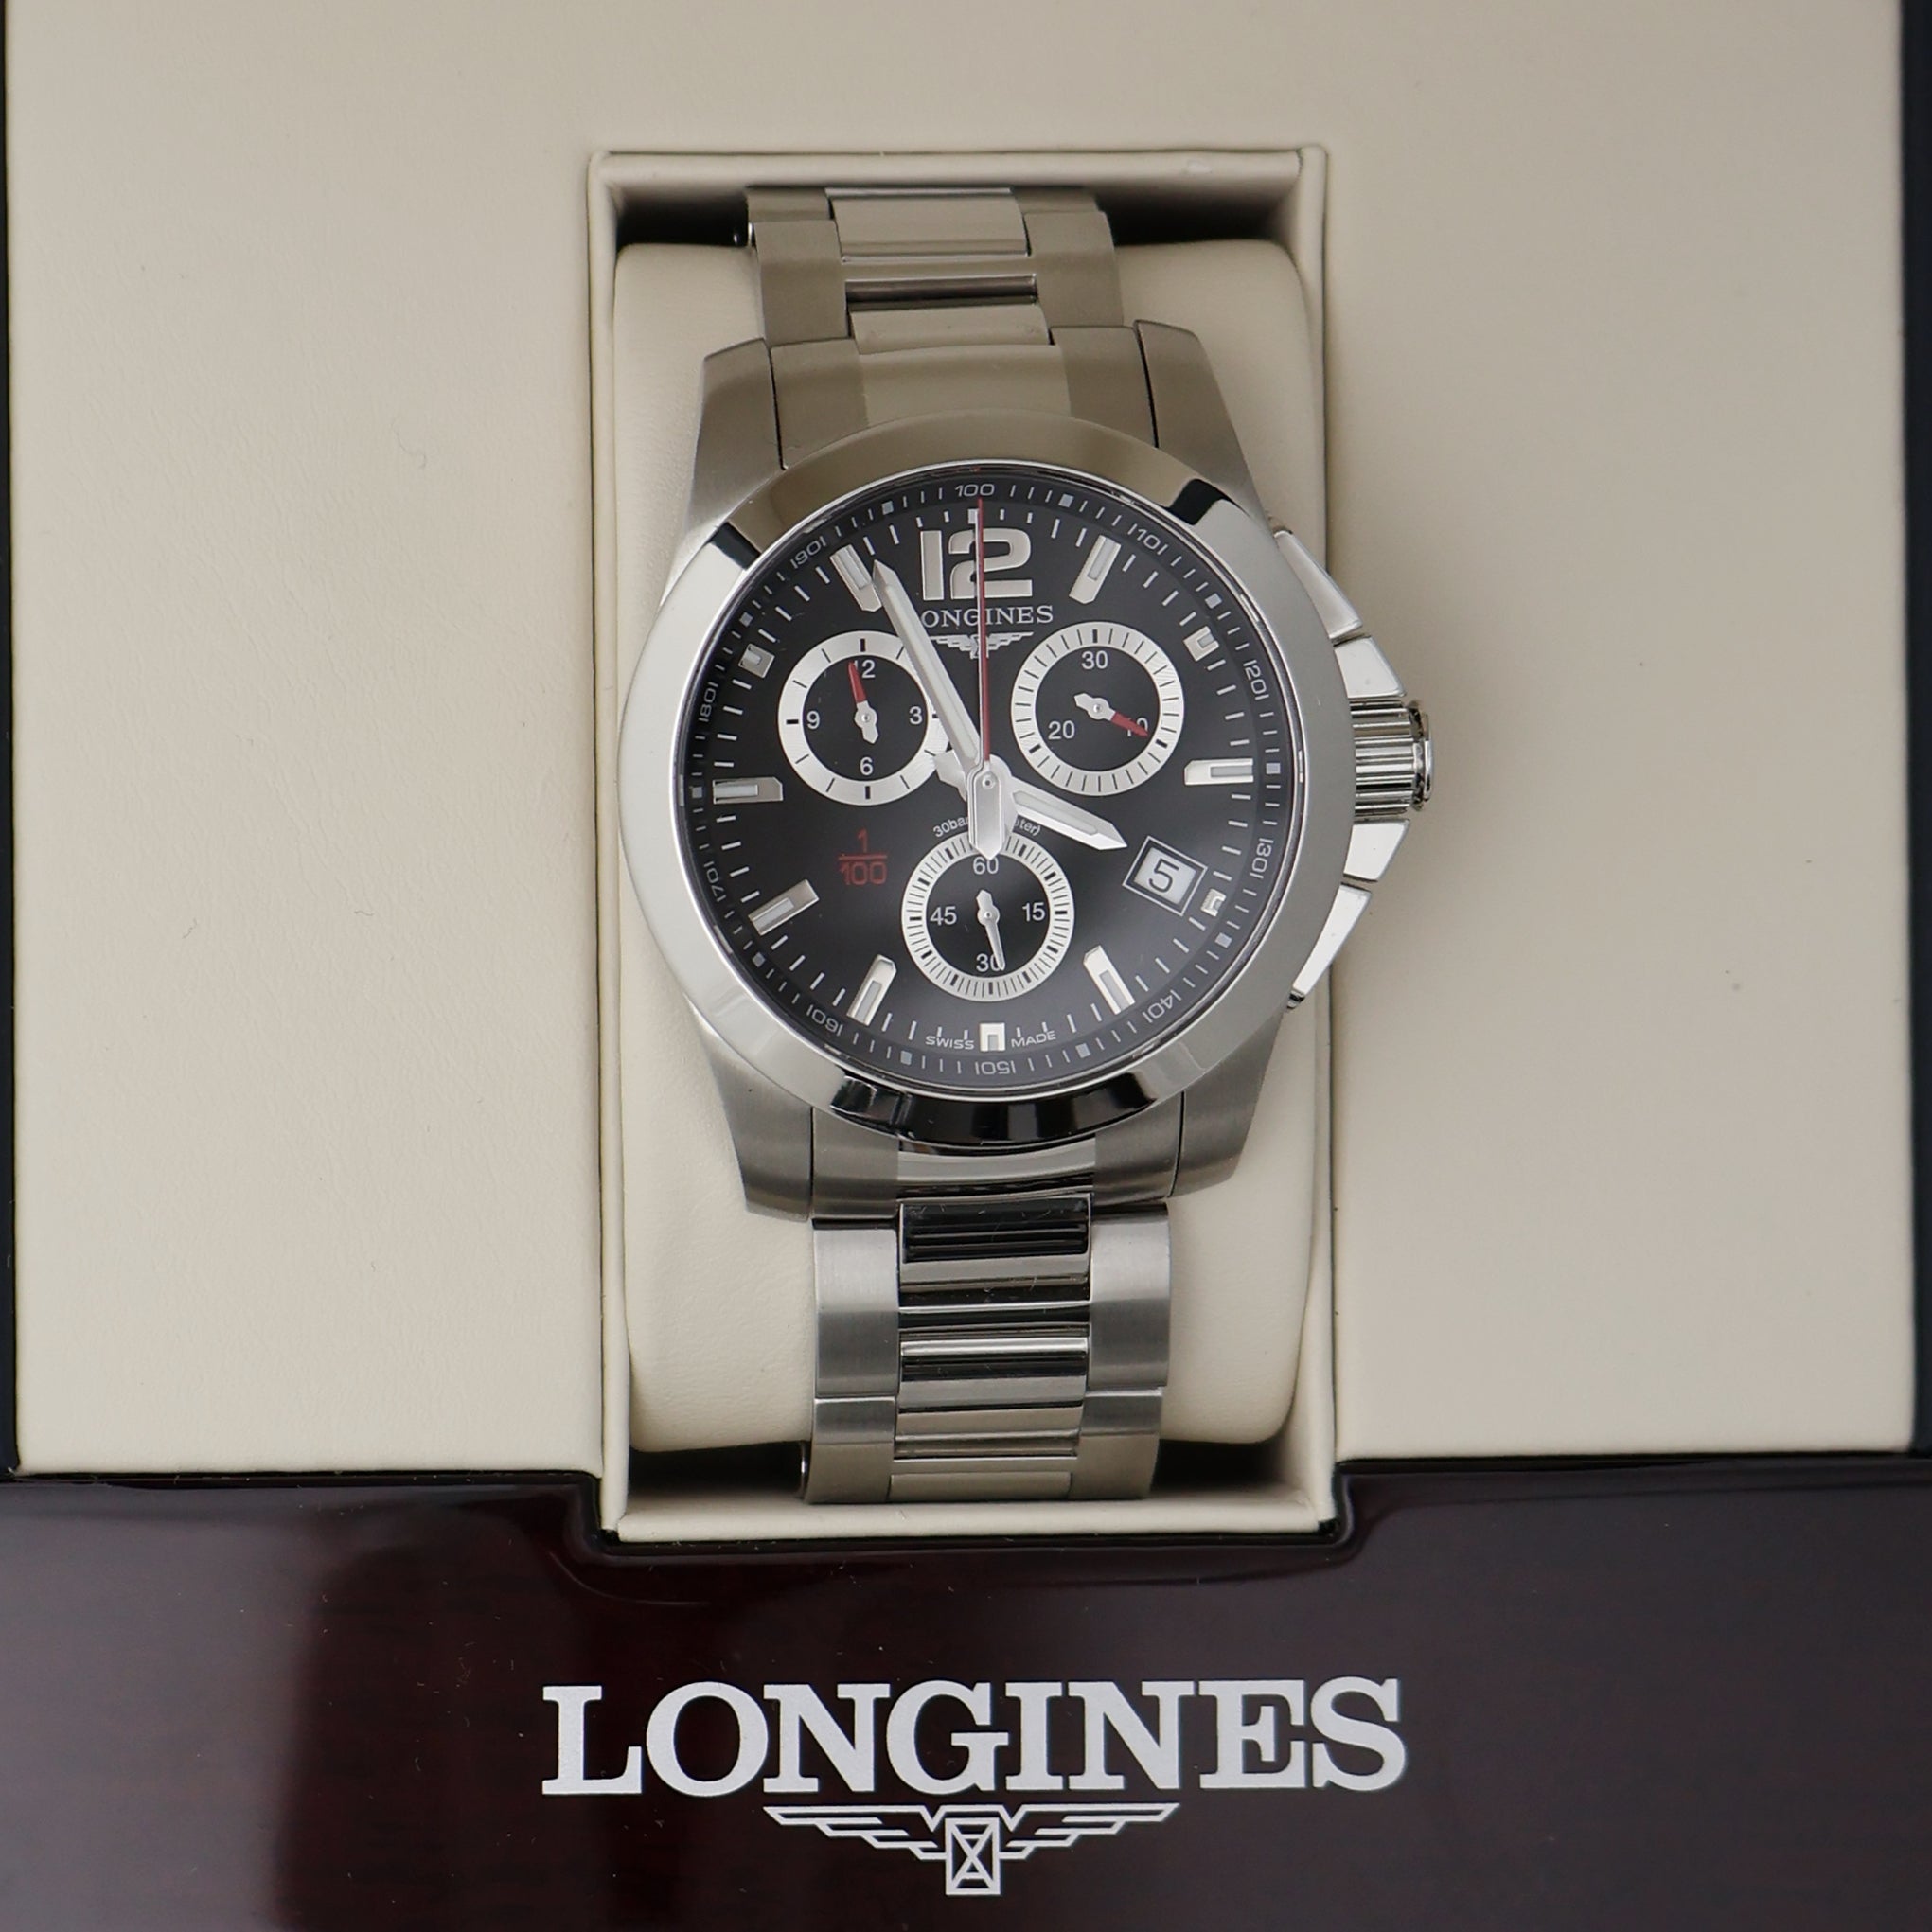 update alt-text with template Watches - Mens-Longines-L37004566-PO-12-hour display, 40 - 45 mm, black, chronograph, Conquest, date, Longines, mens, menswatches, new arrivals, pre-owned, round, rpSKU_L37004566, rpSKU_L37174569, rpSKU_L37174666, rpSKU_L37174766, rpSKU_L37784586, seconds sub-dial, stainless steel band, stainless steel case, swiss quartz, watches-Watches & Beyond